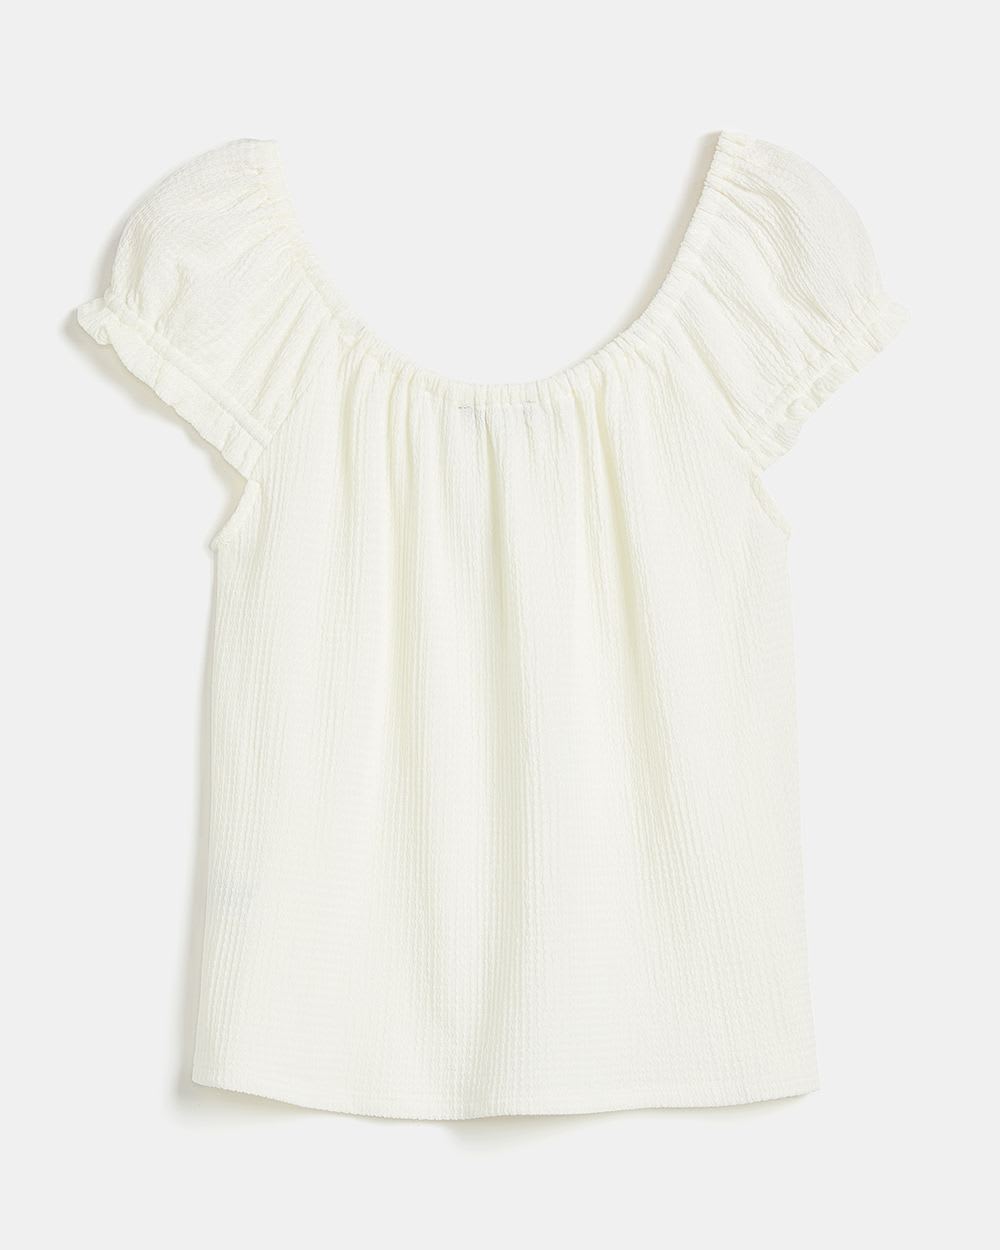 Scoop-Neck Blistered Peasant Top with Tassels